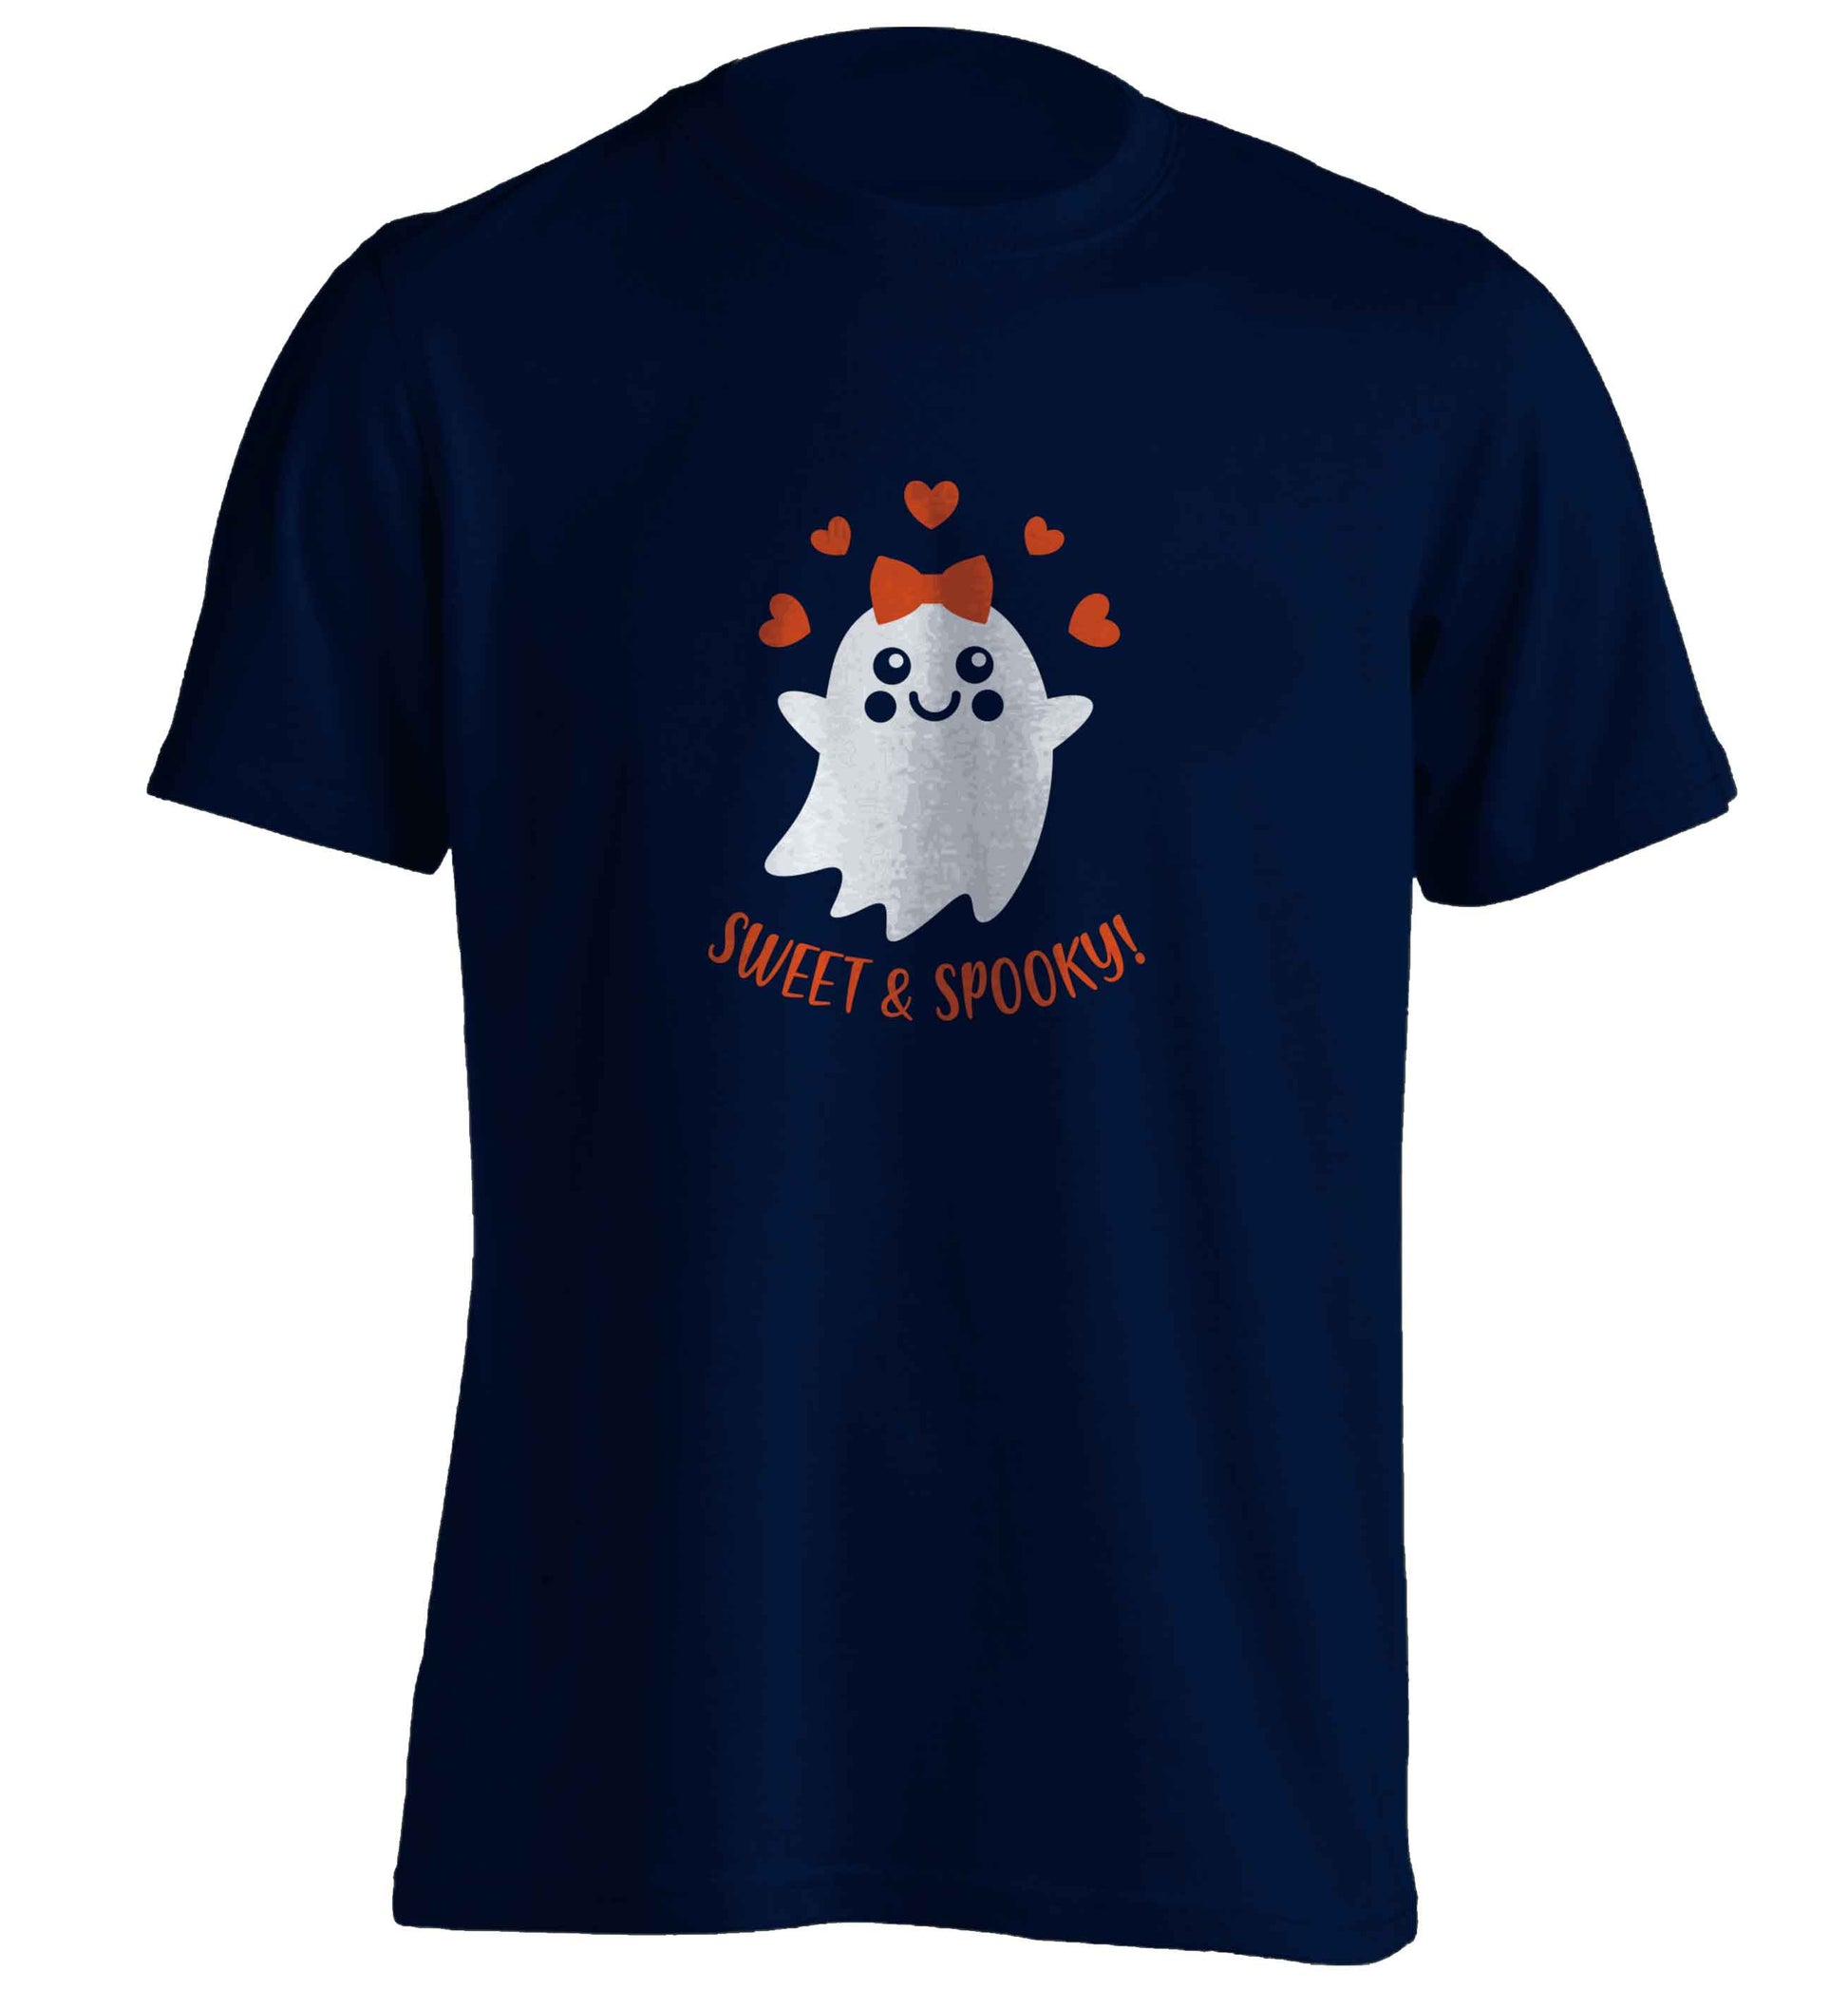 Sweet and spooky adults unisex navy Tshirt 2XL